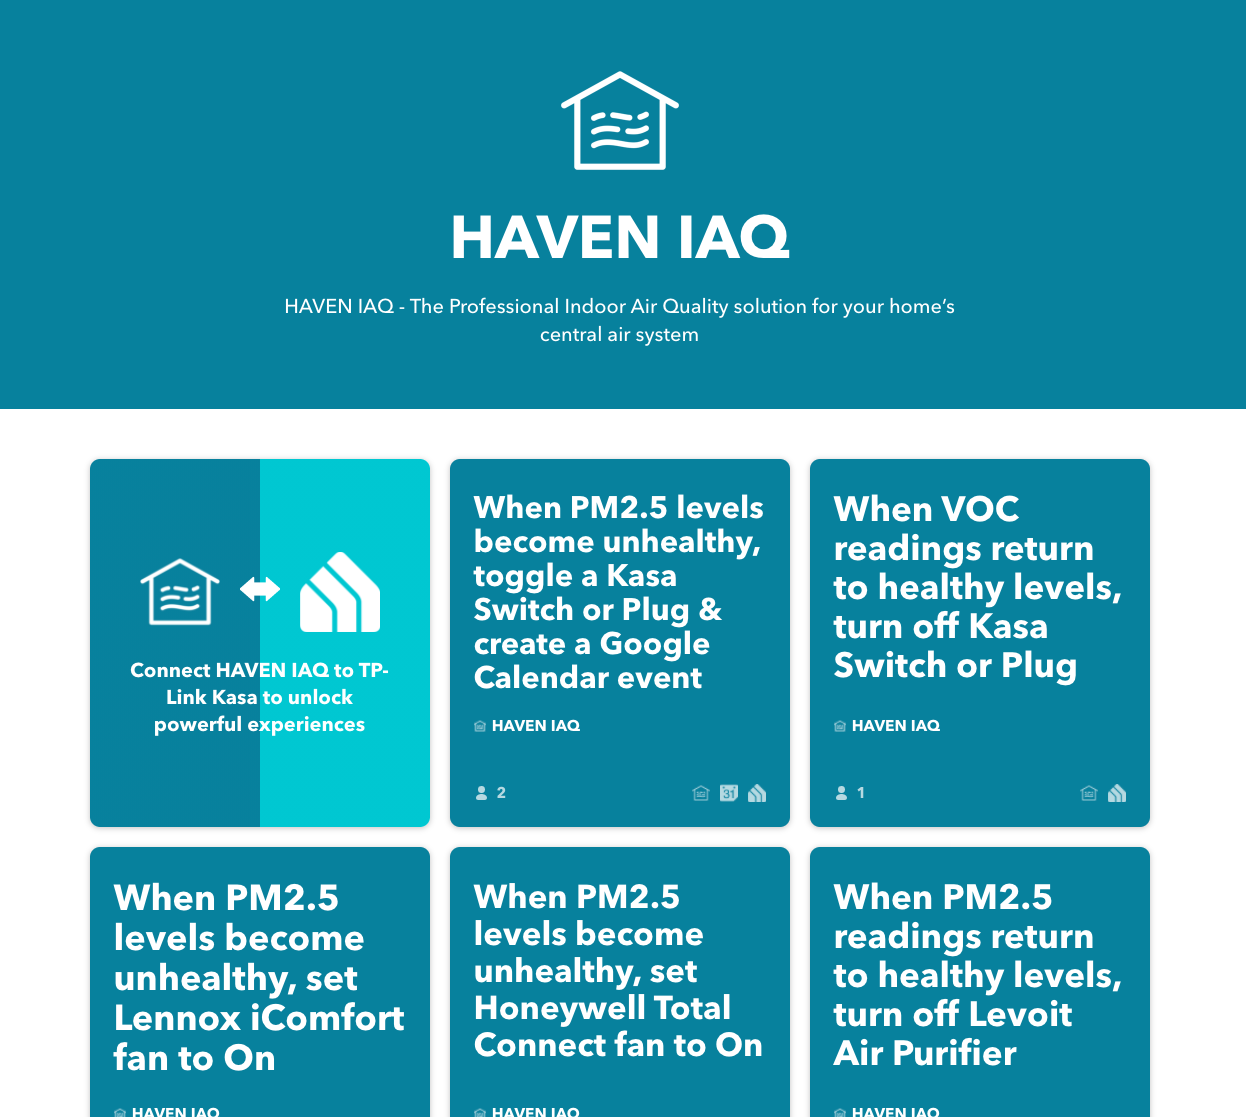 Screenshot of the HAVEN IAQ Services page on IFTTT.com